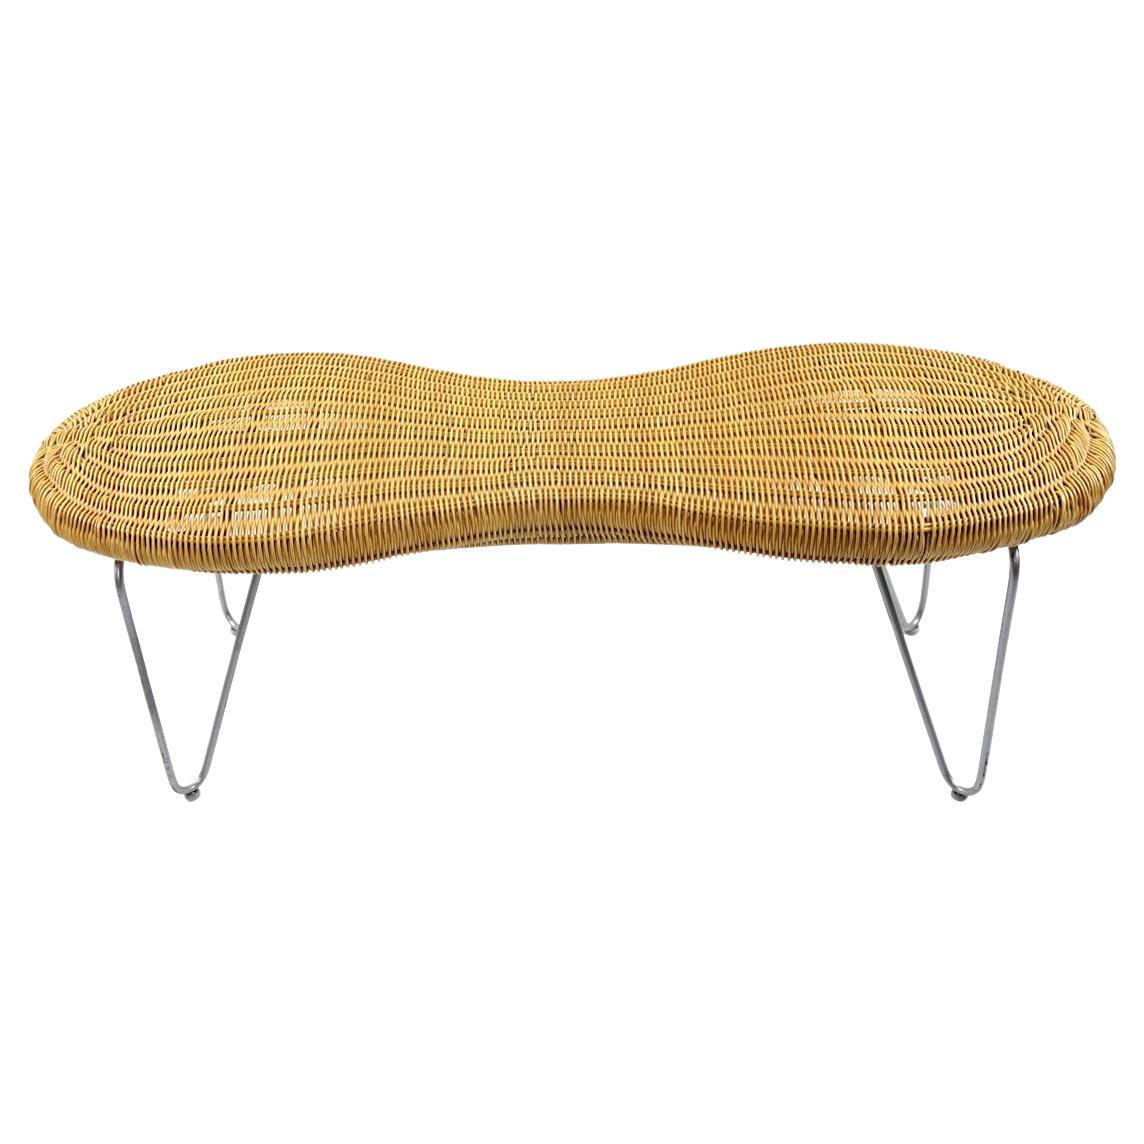 Bench in the Shape of a Peeling Peanut Made of Rattan, Wood and Stainless Steel For Sale